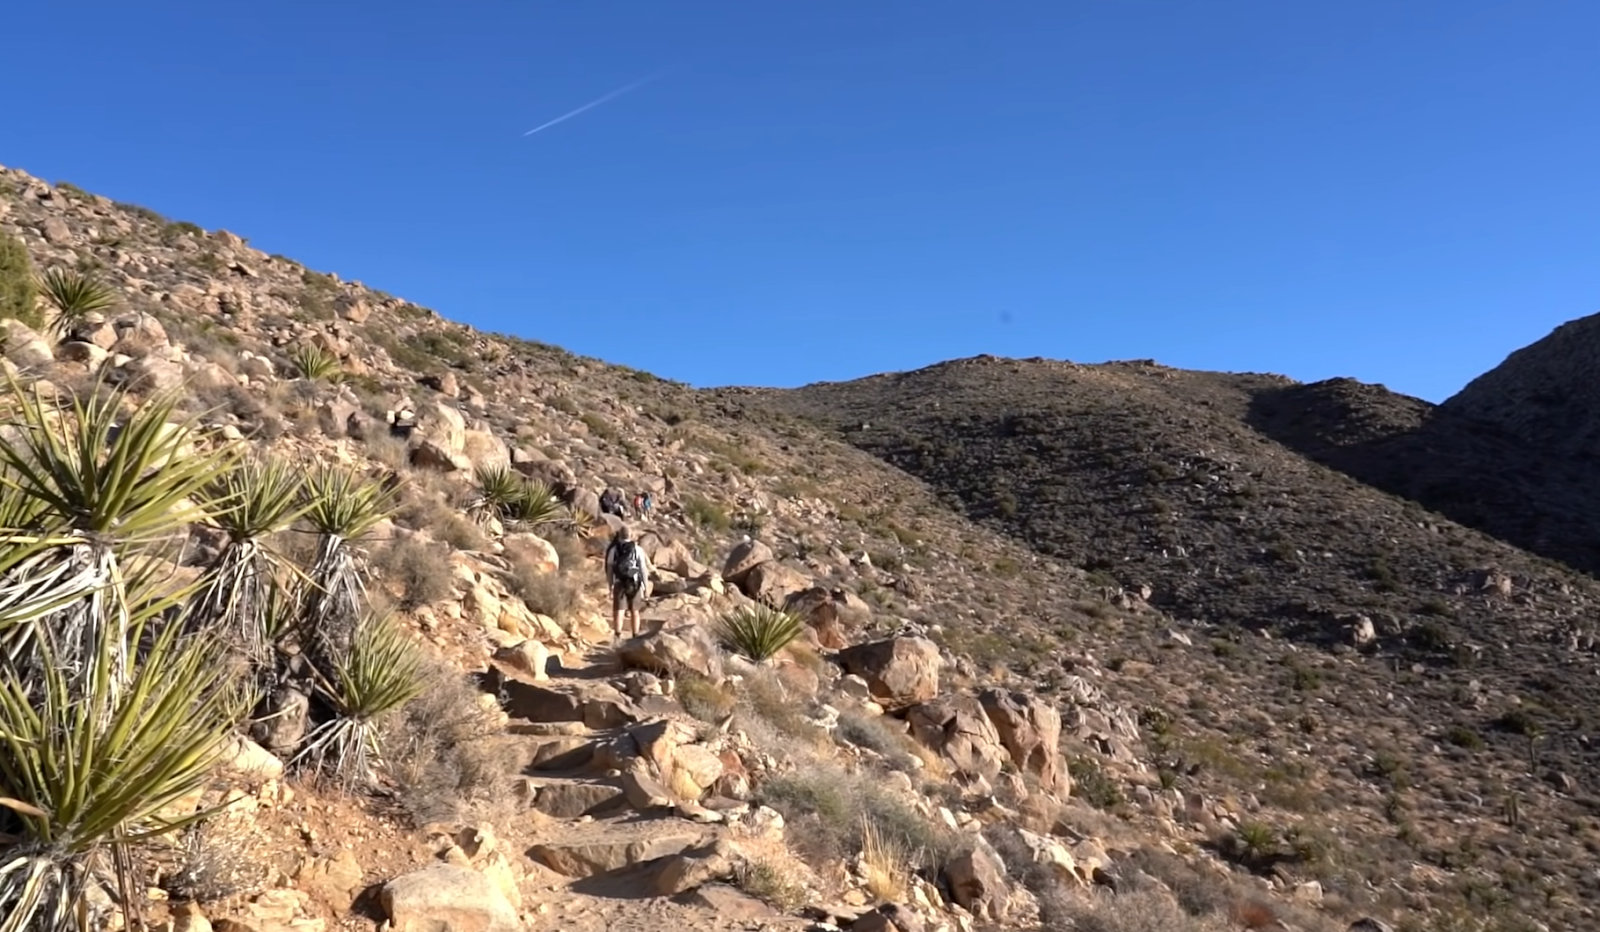 ray mountain - hills covered with rocks and cacti plants, people on the mountain